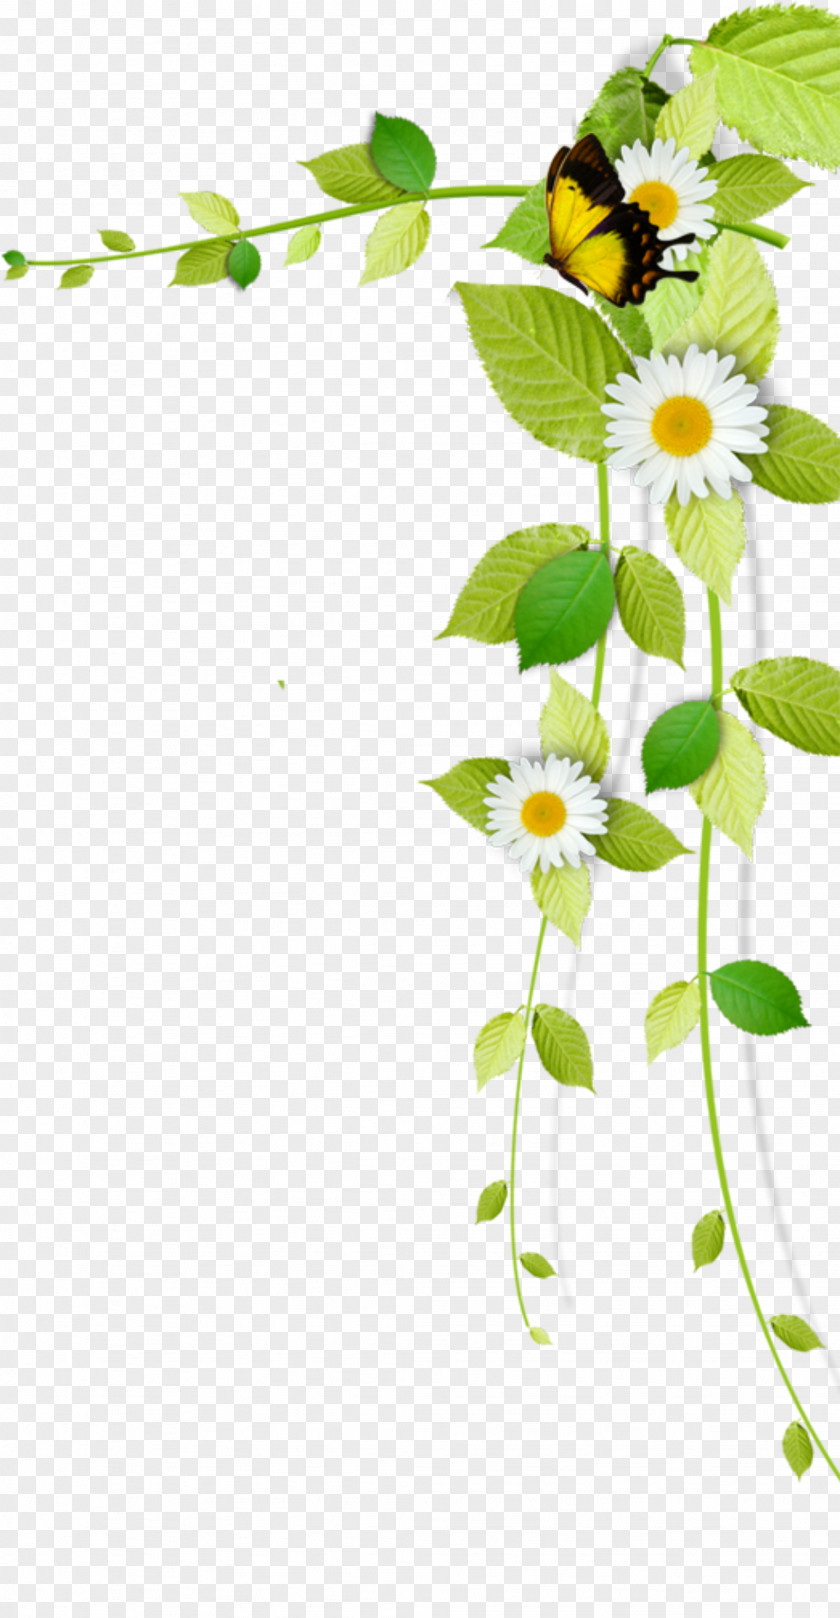 Flowers And Vines PNG and vines clipart PNG